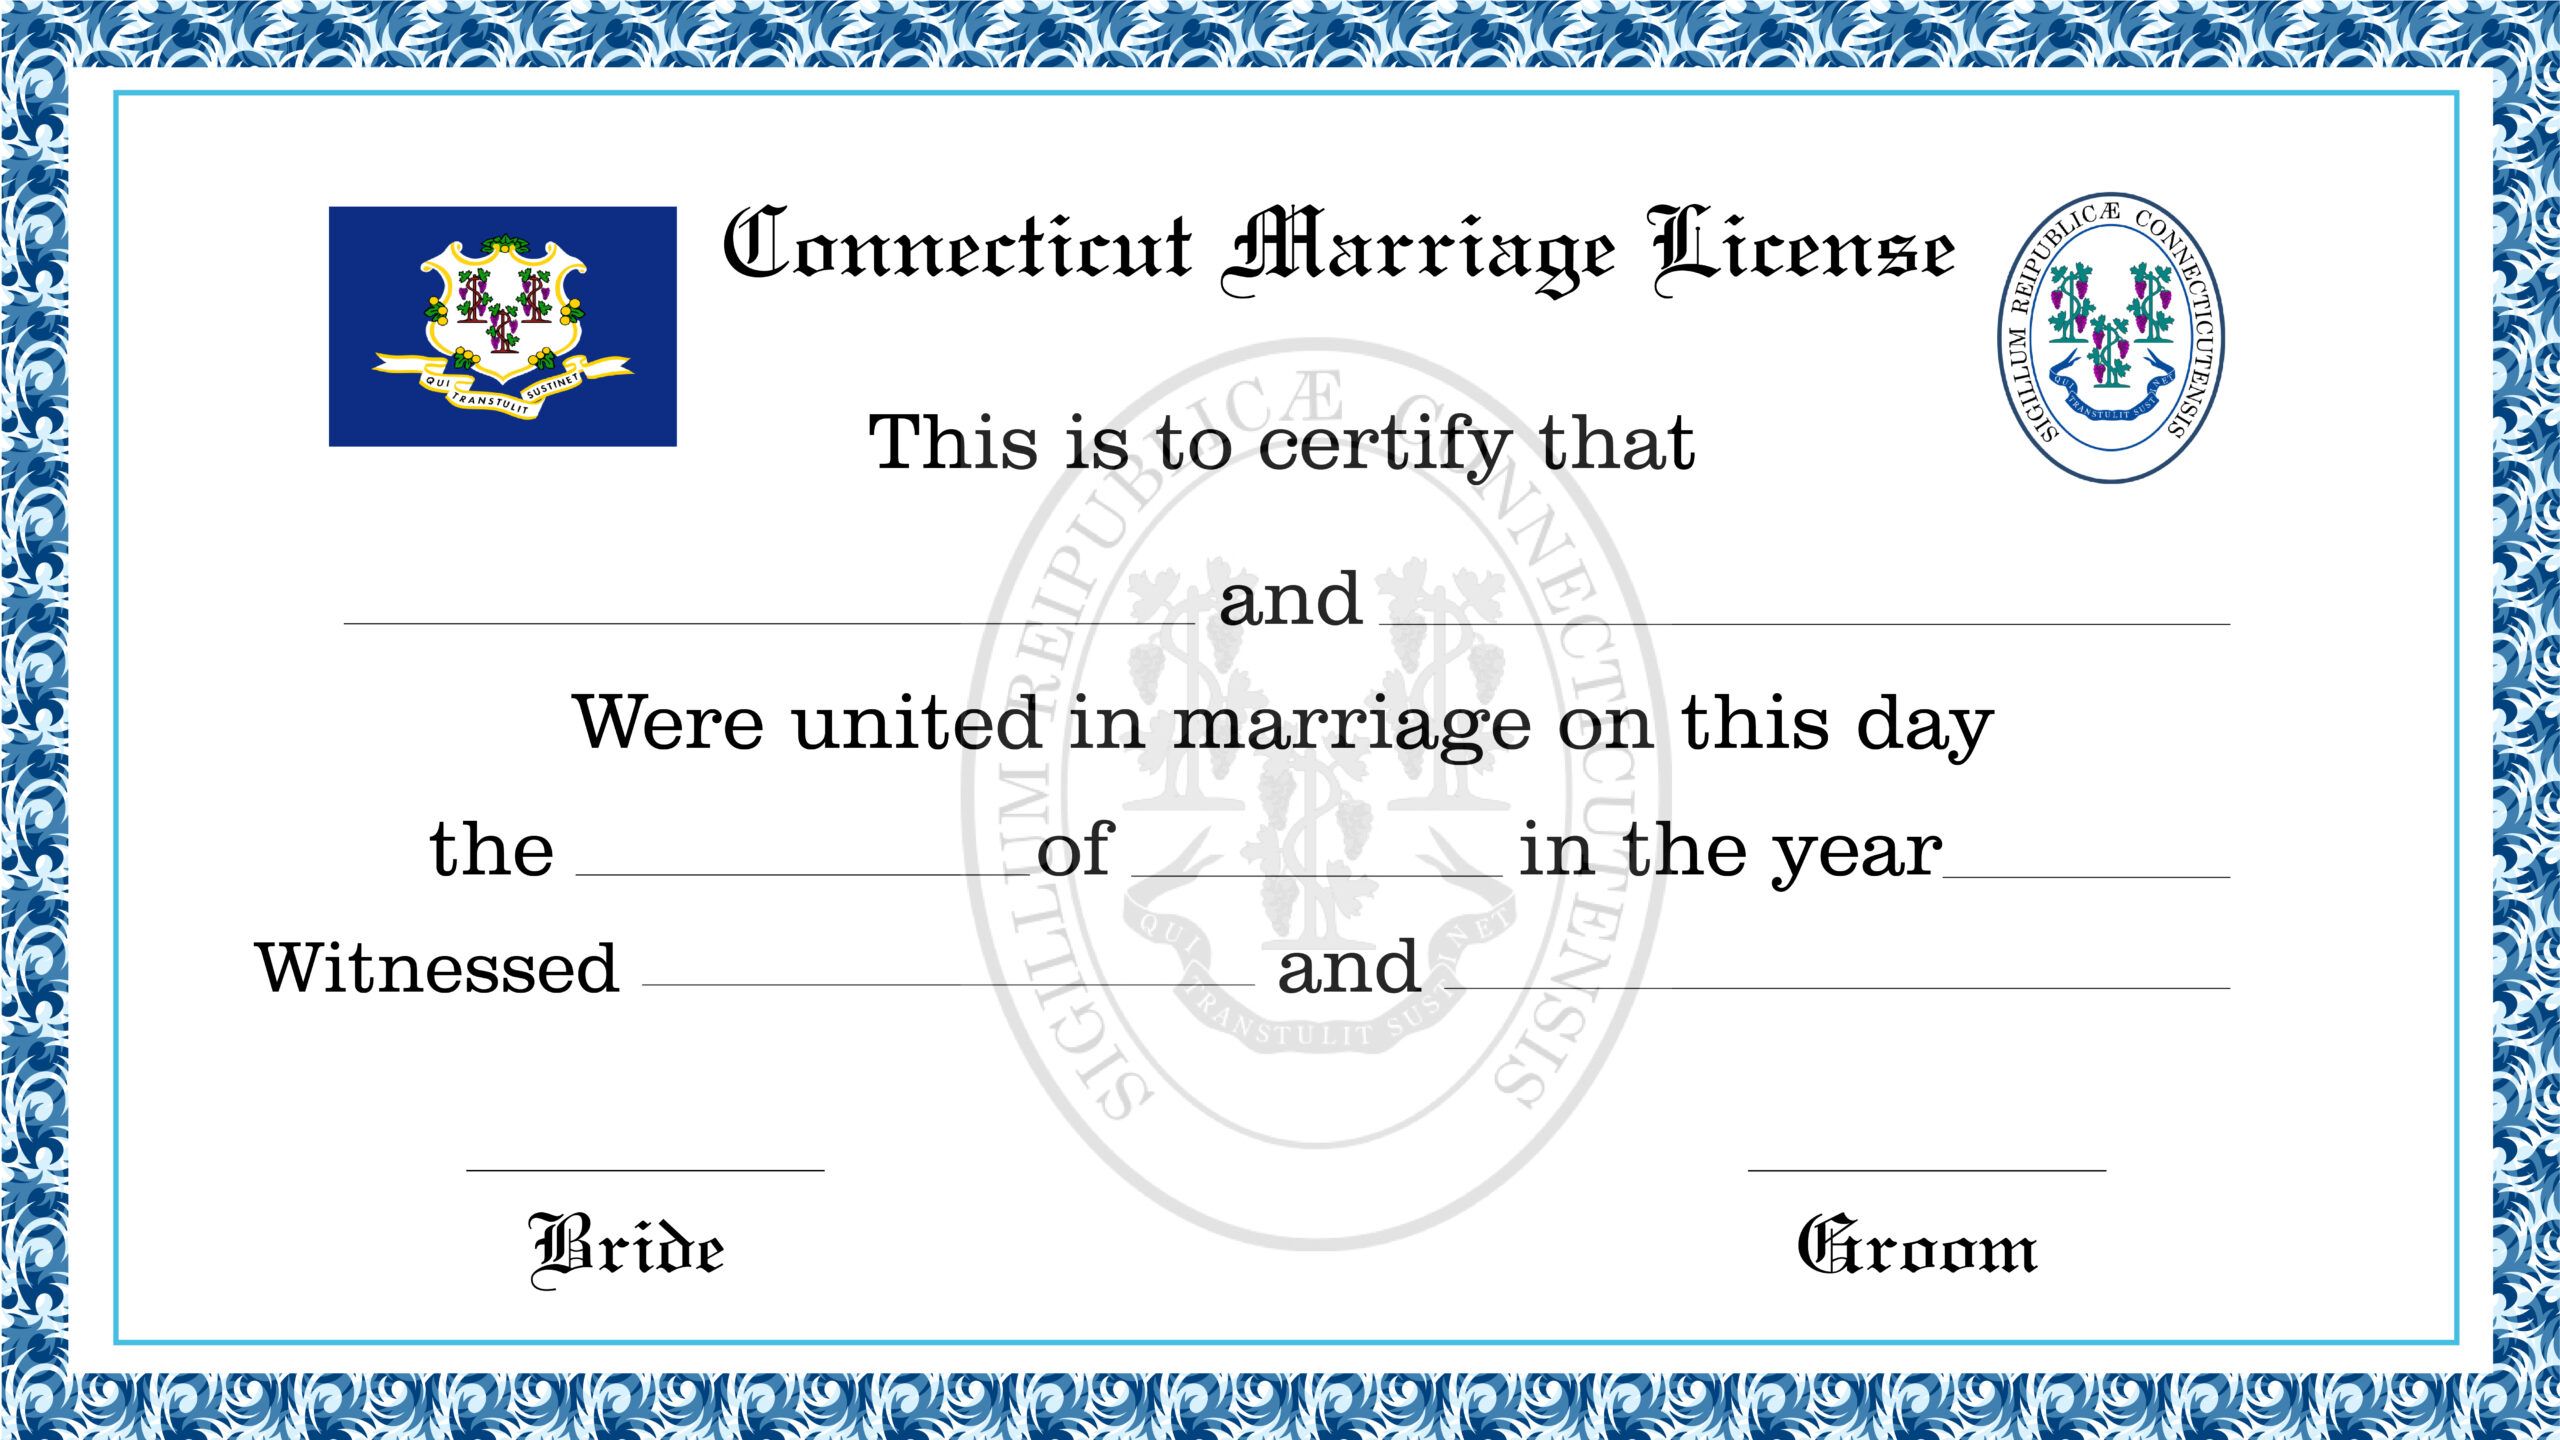 Connecticut Marriage License License Lookup